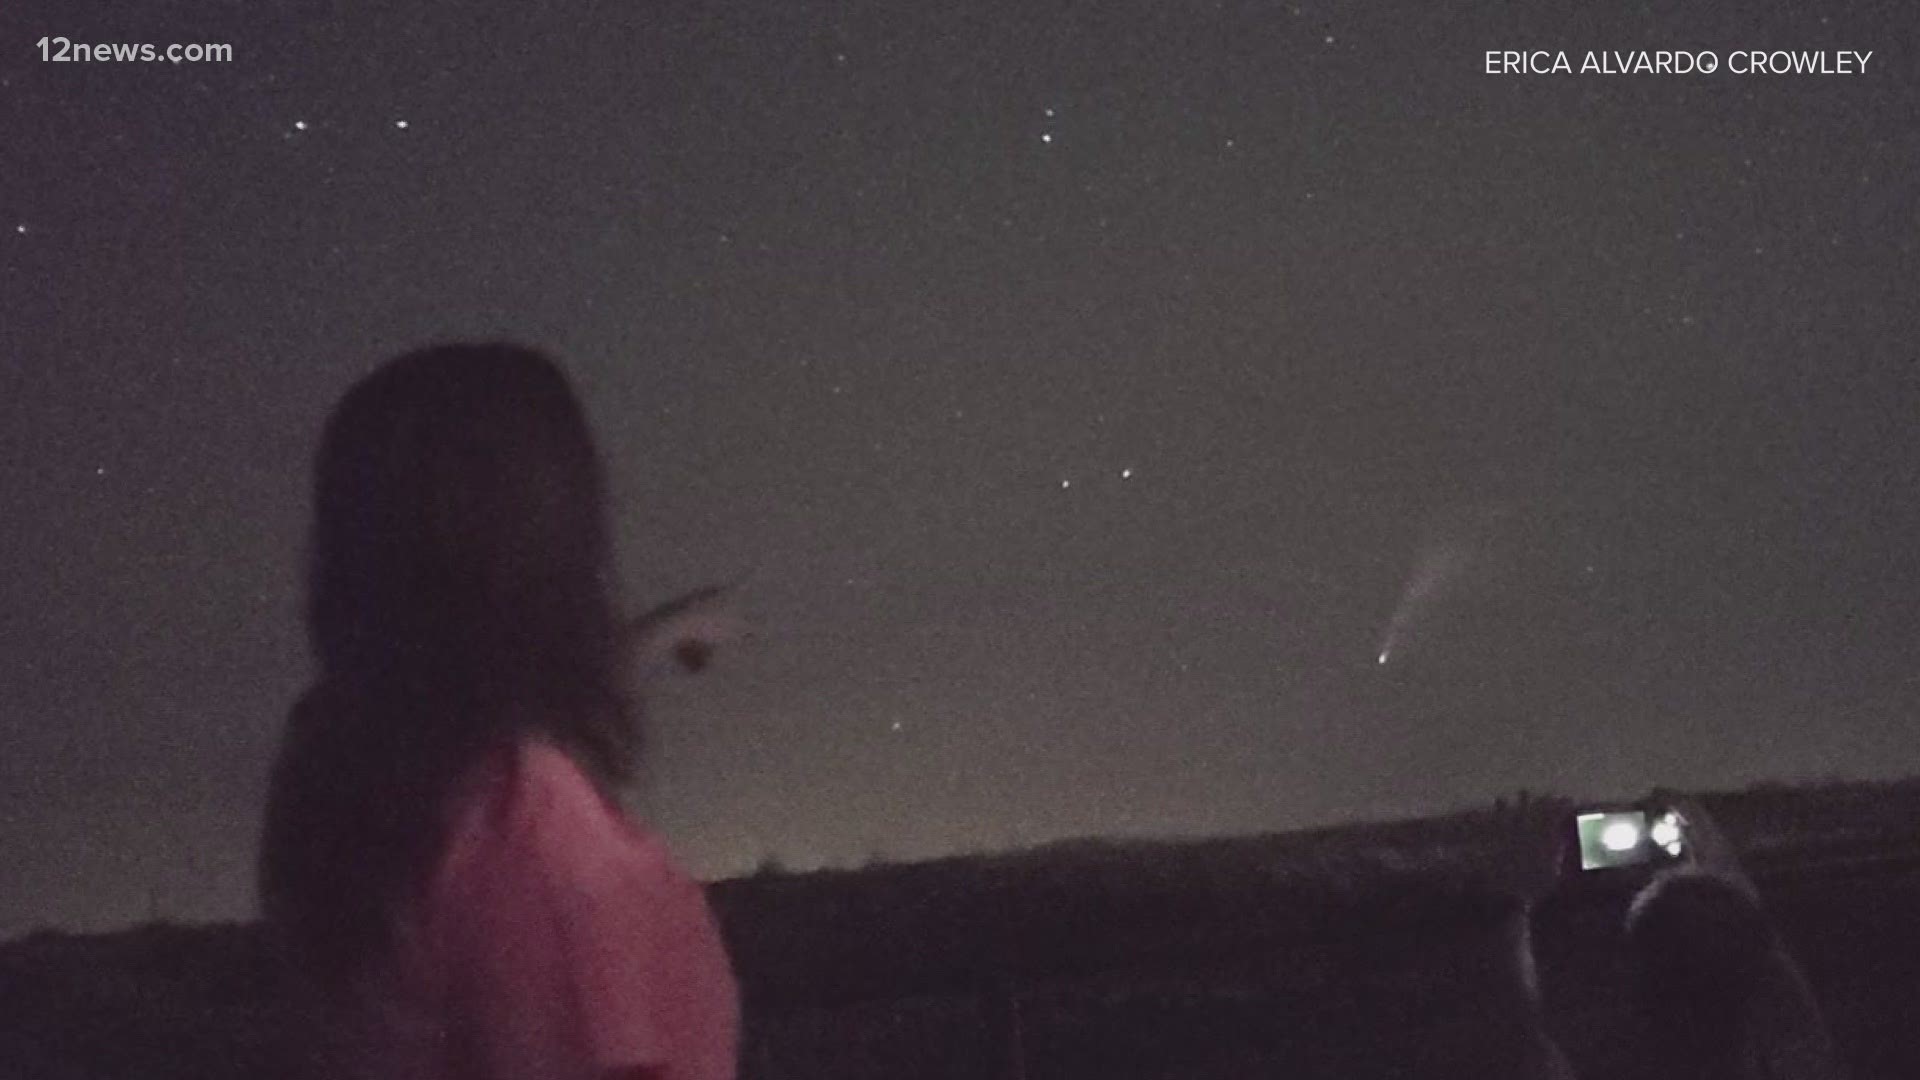 Share your photos of the NEOWISE comet in the 12 News app. Download it at 12News.com/App.